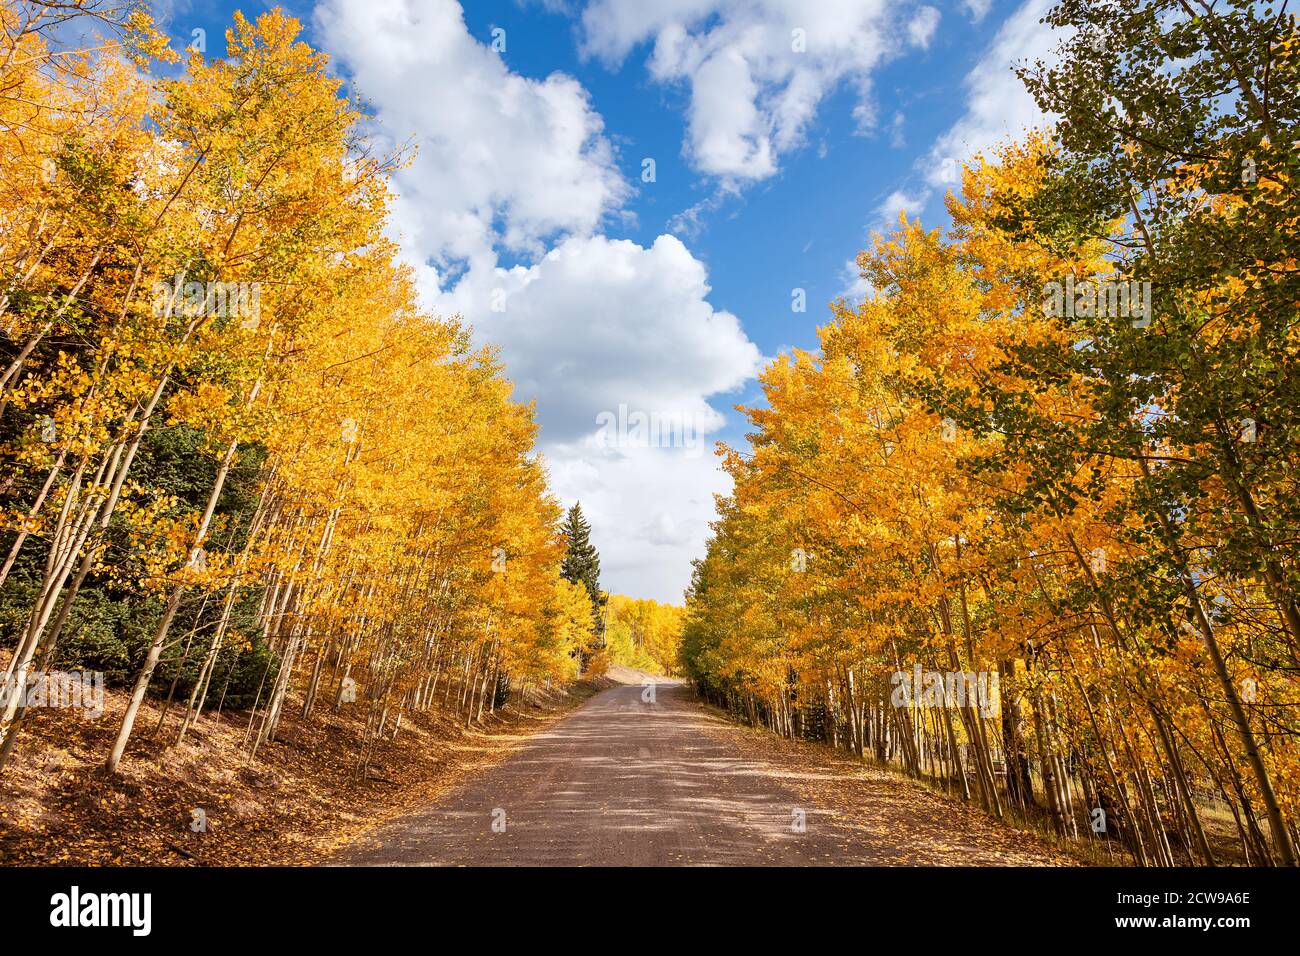 Scenic autumn landscape and dirt road lined with Aspen trees near Silver Jack Reservoir, Colorado, USA Stock Photo